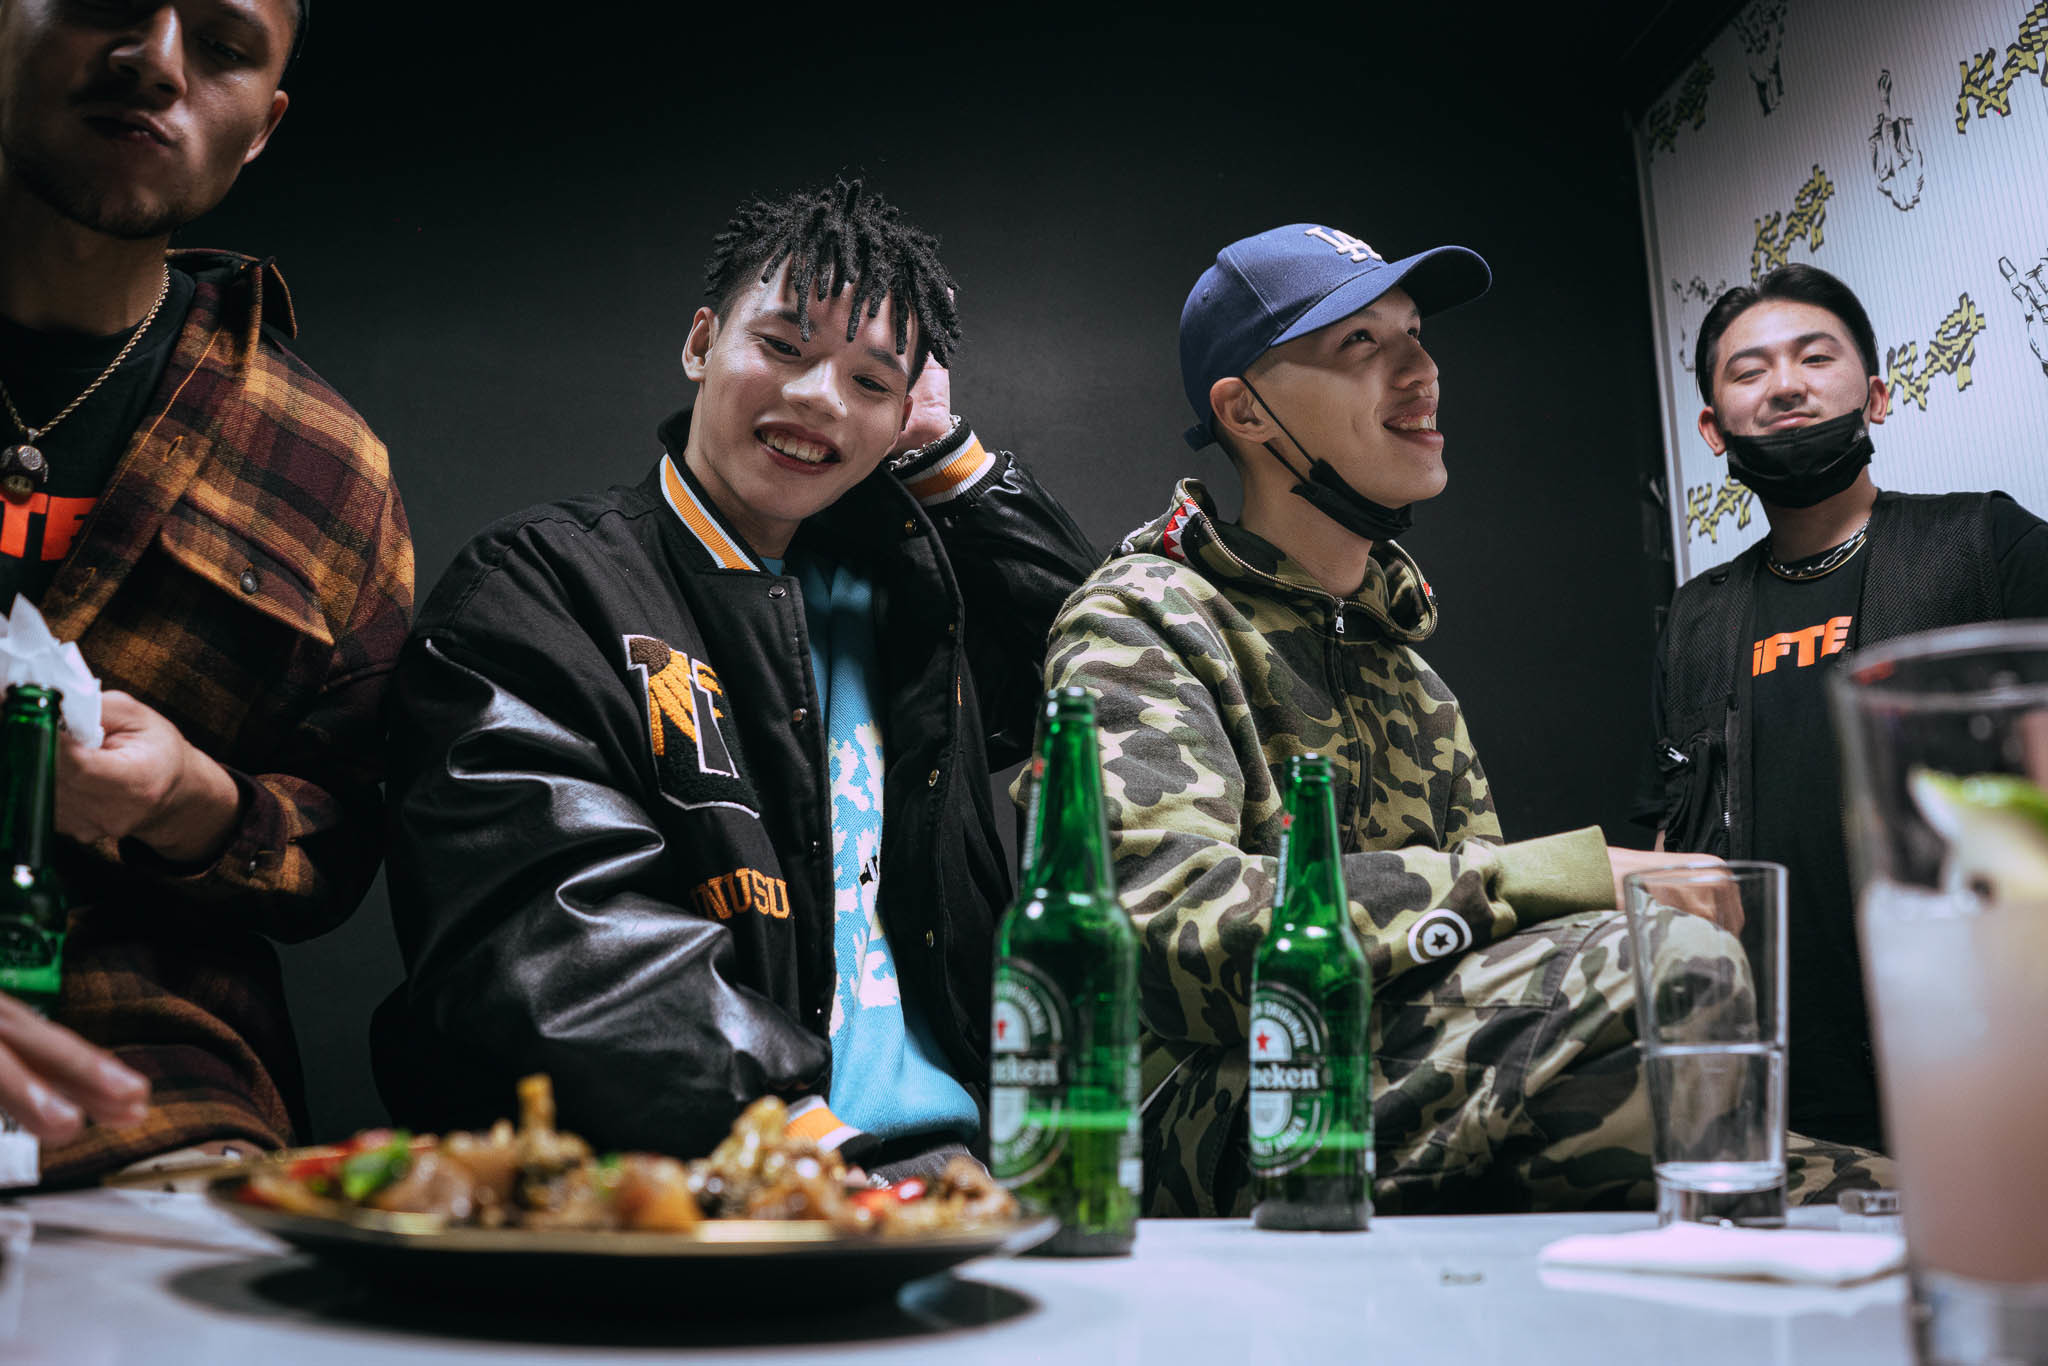 The LiFTED launch party at Klash Taipei was a movie | LIFTED Asia